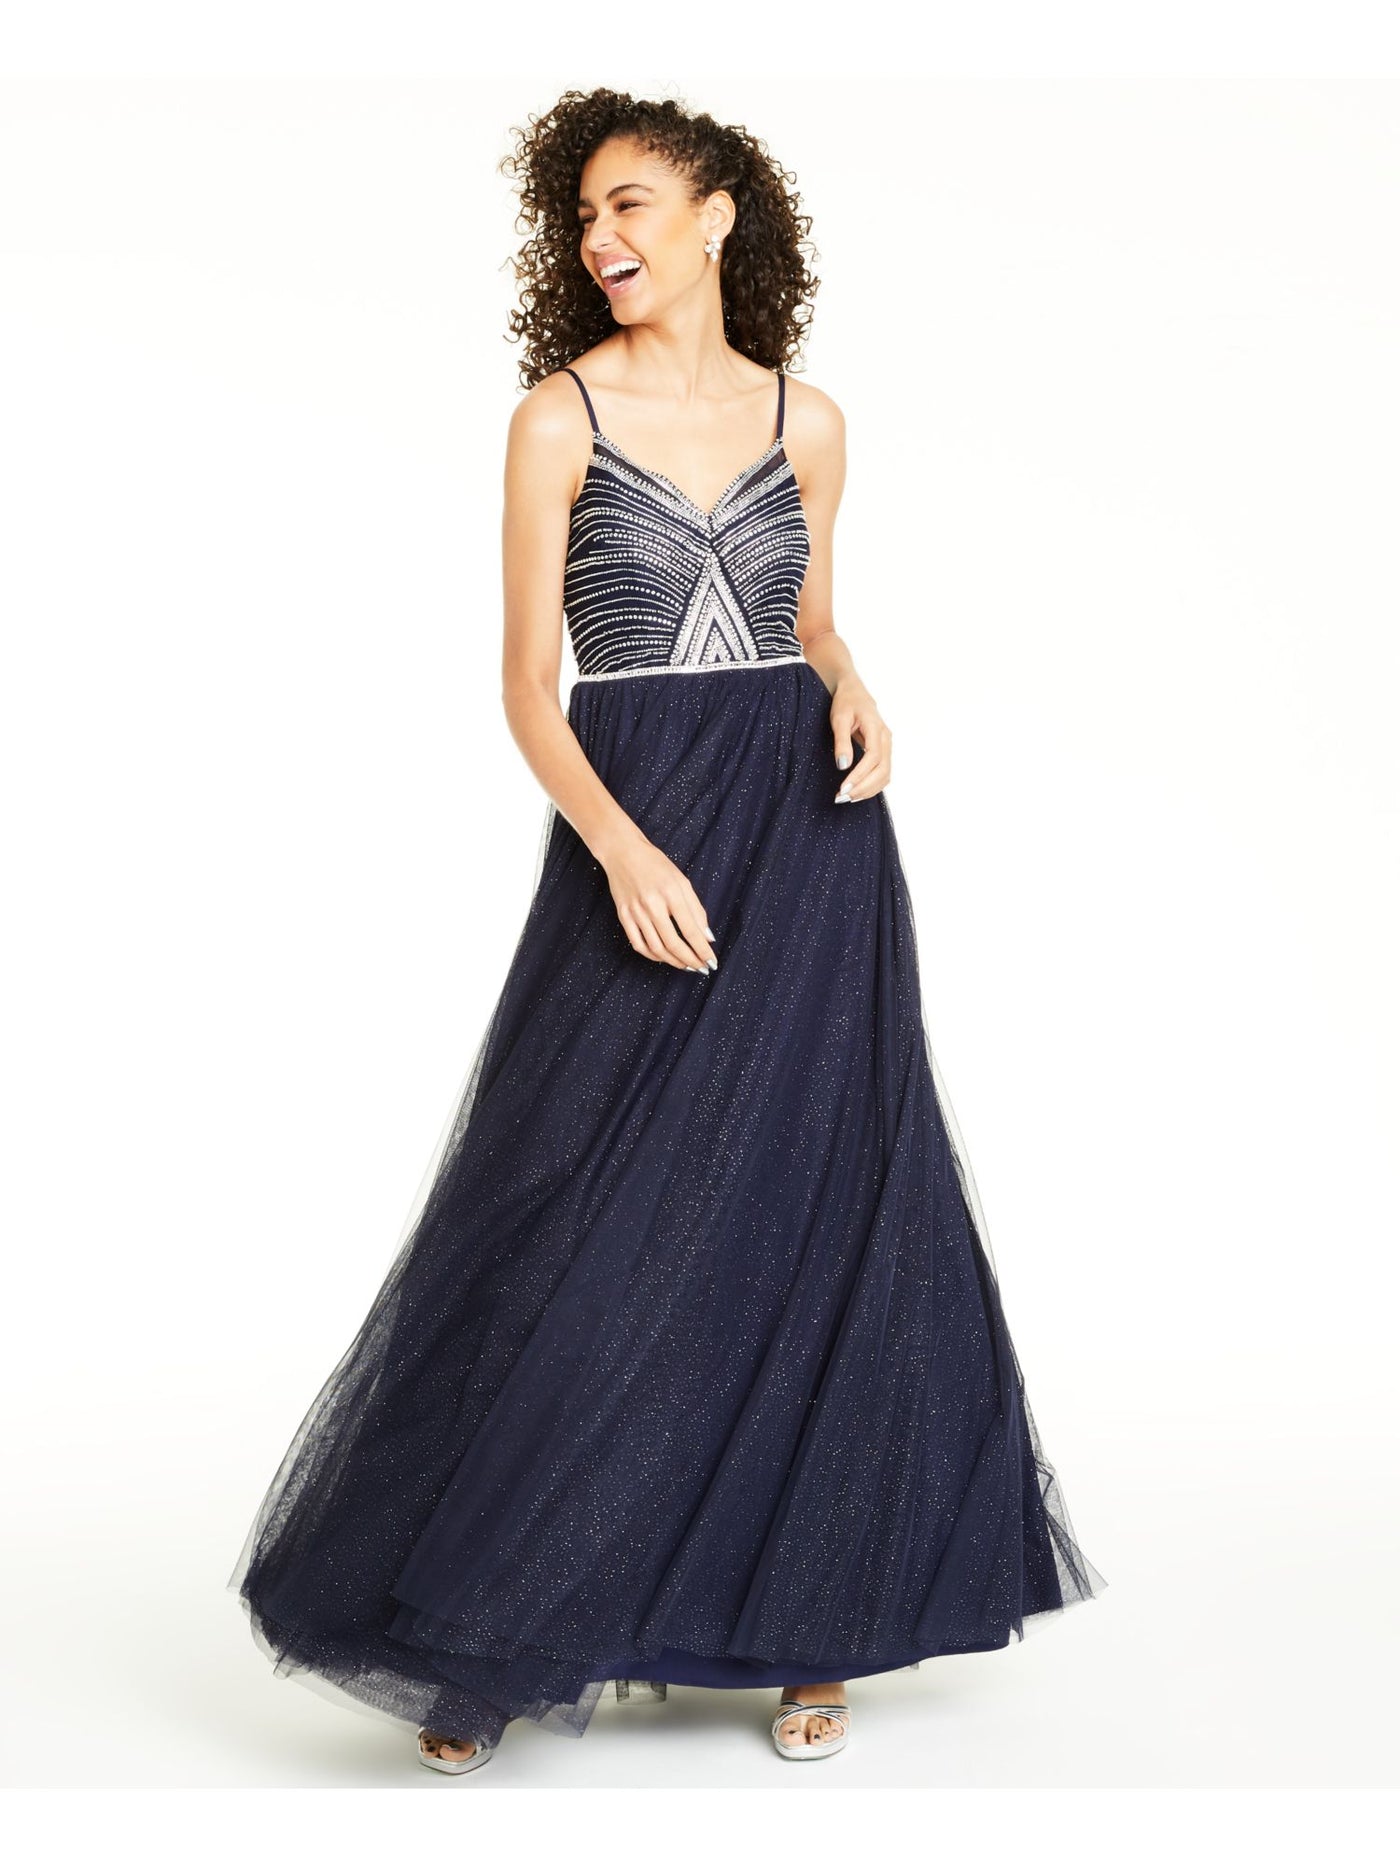 SAY YES TO THE PROM Womens Navy Glitter Sheer Spaghetti Strap Sweetheart Neckline Full-Length Formal Fit + Flare Dress Juniors 1